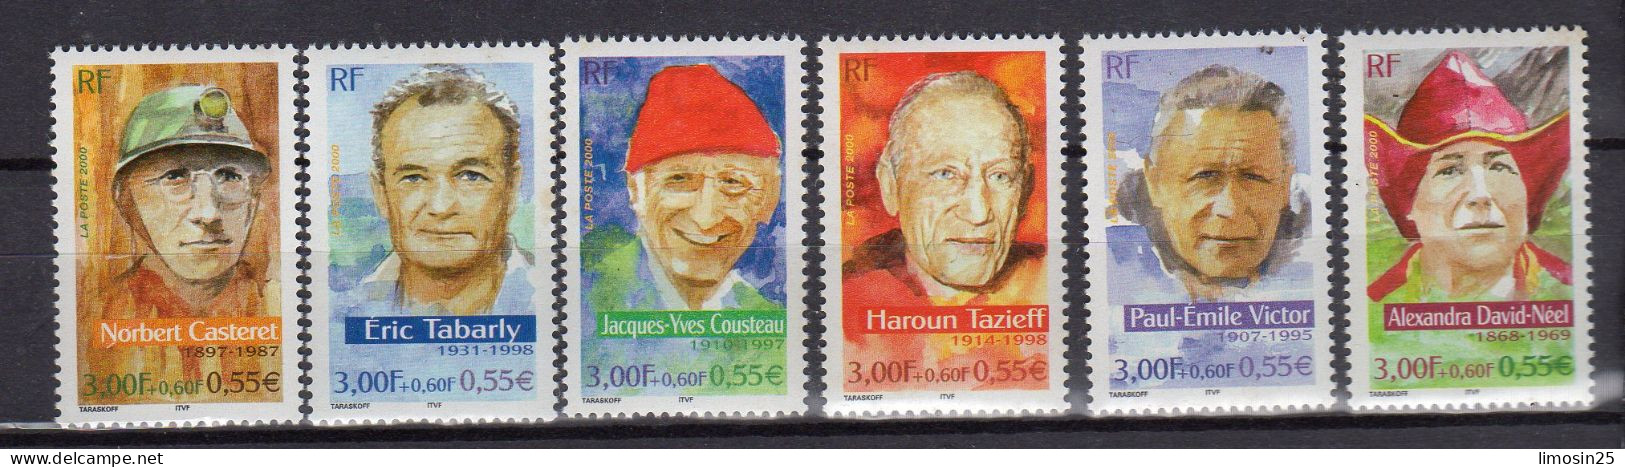 PERSONNAGES CELEBRES - Aventuriers - 2000 - Unused Stamps